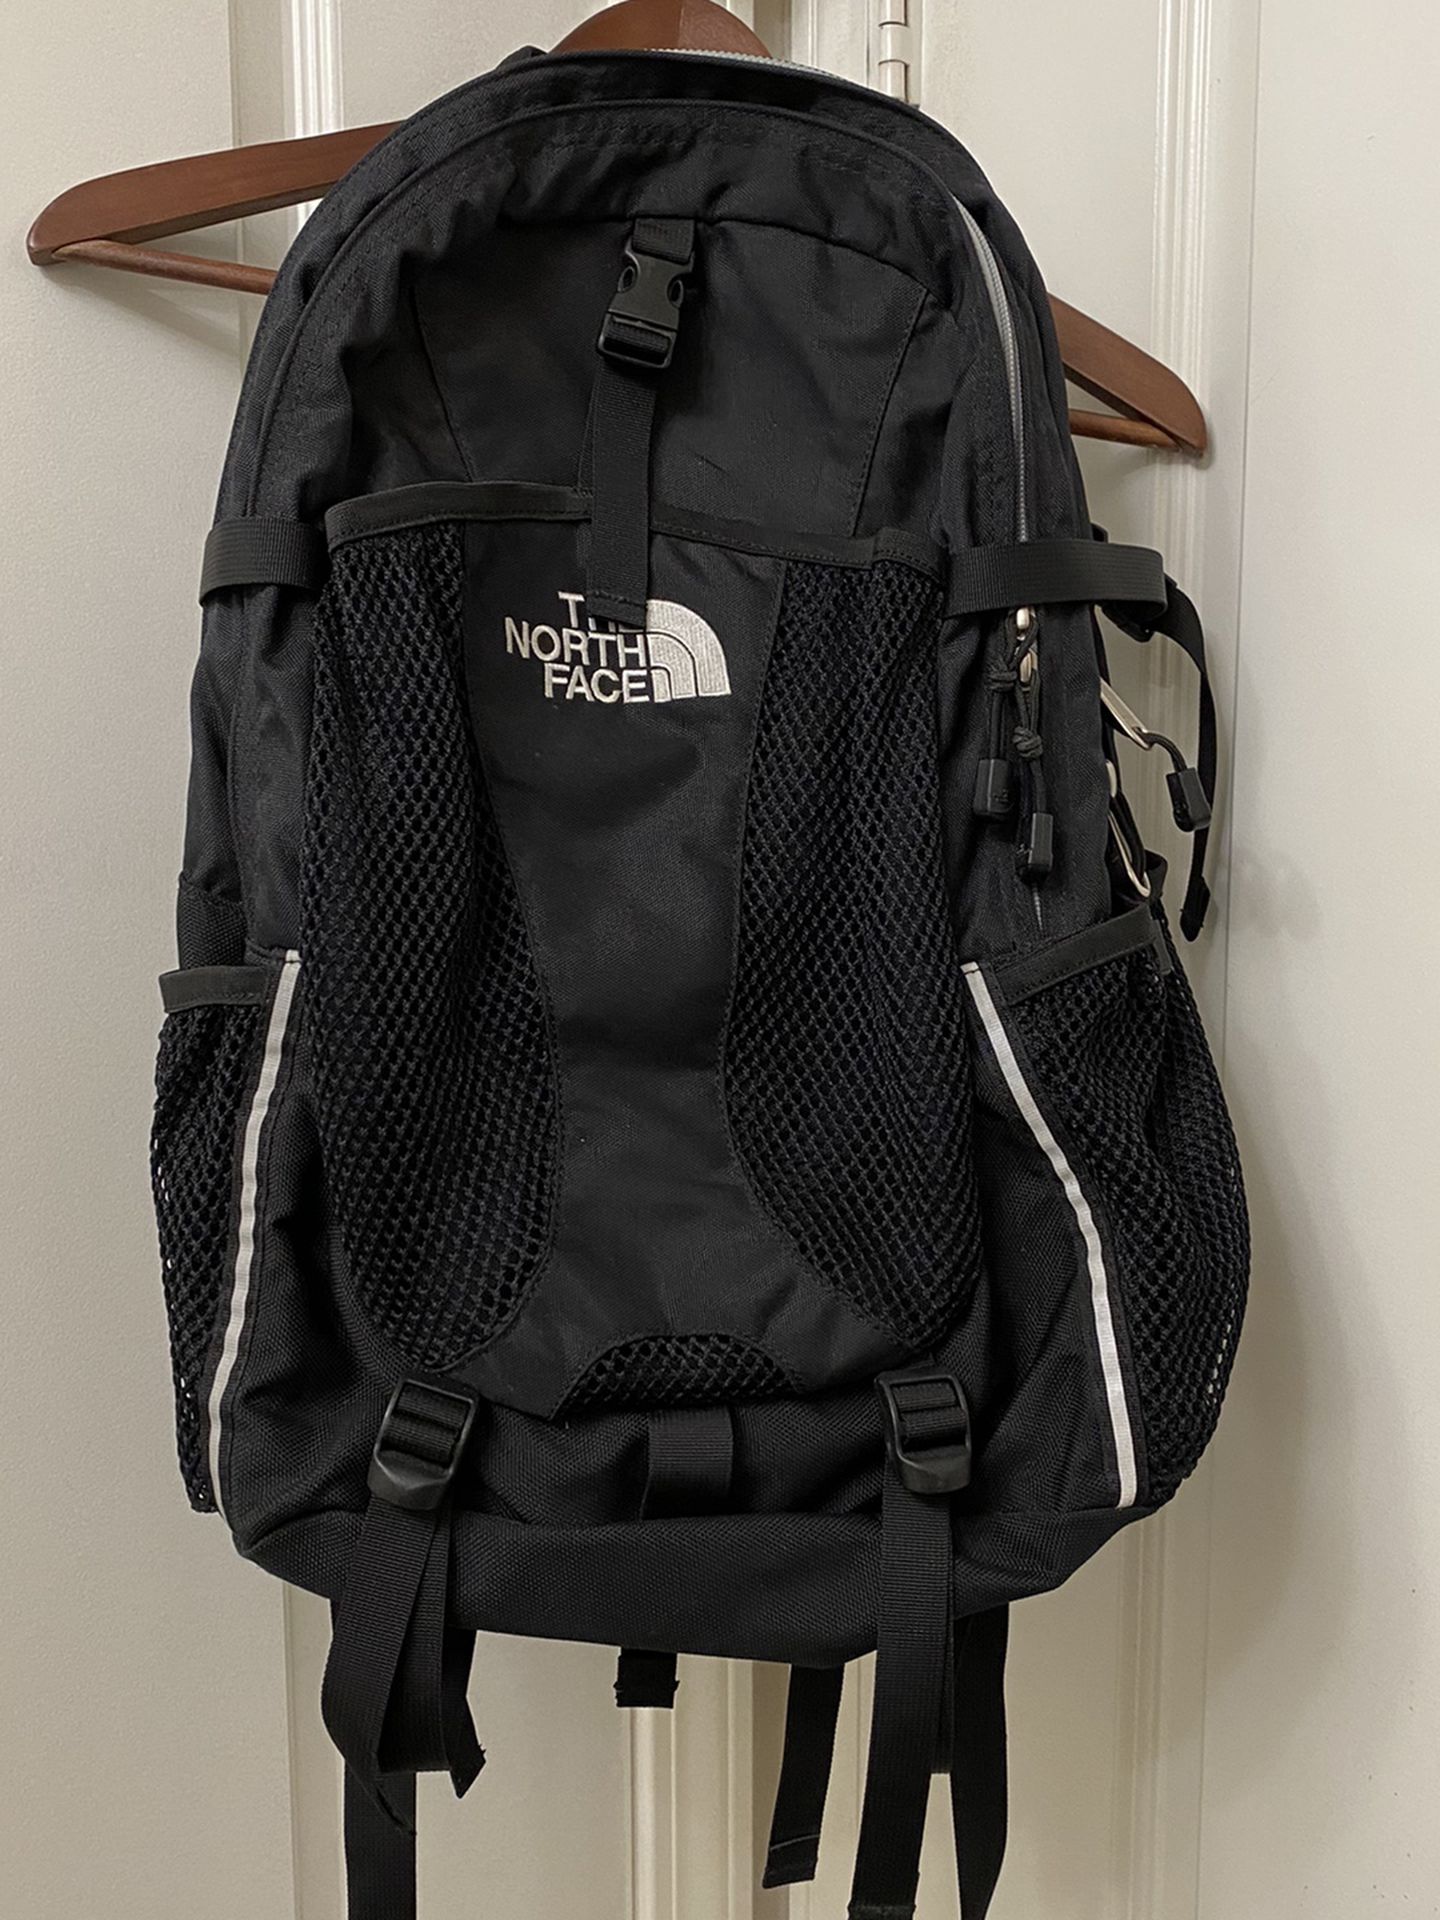 NORTHFACE RECON BACKPACK